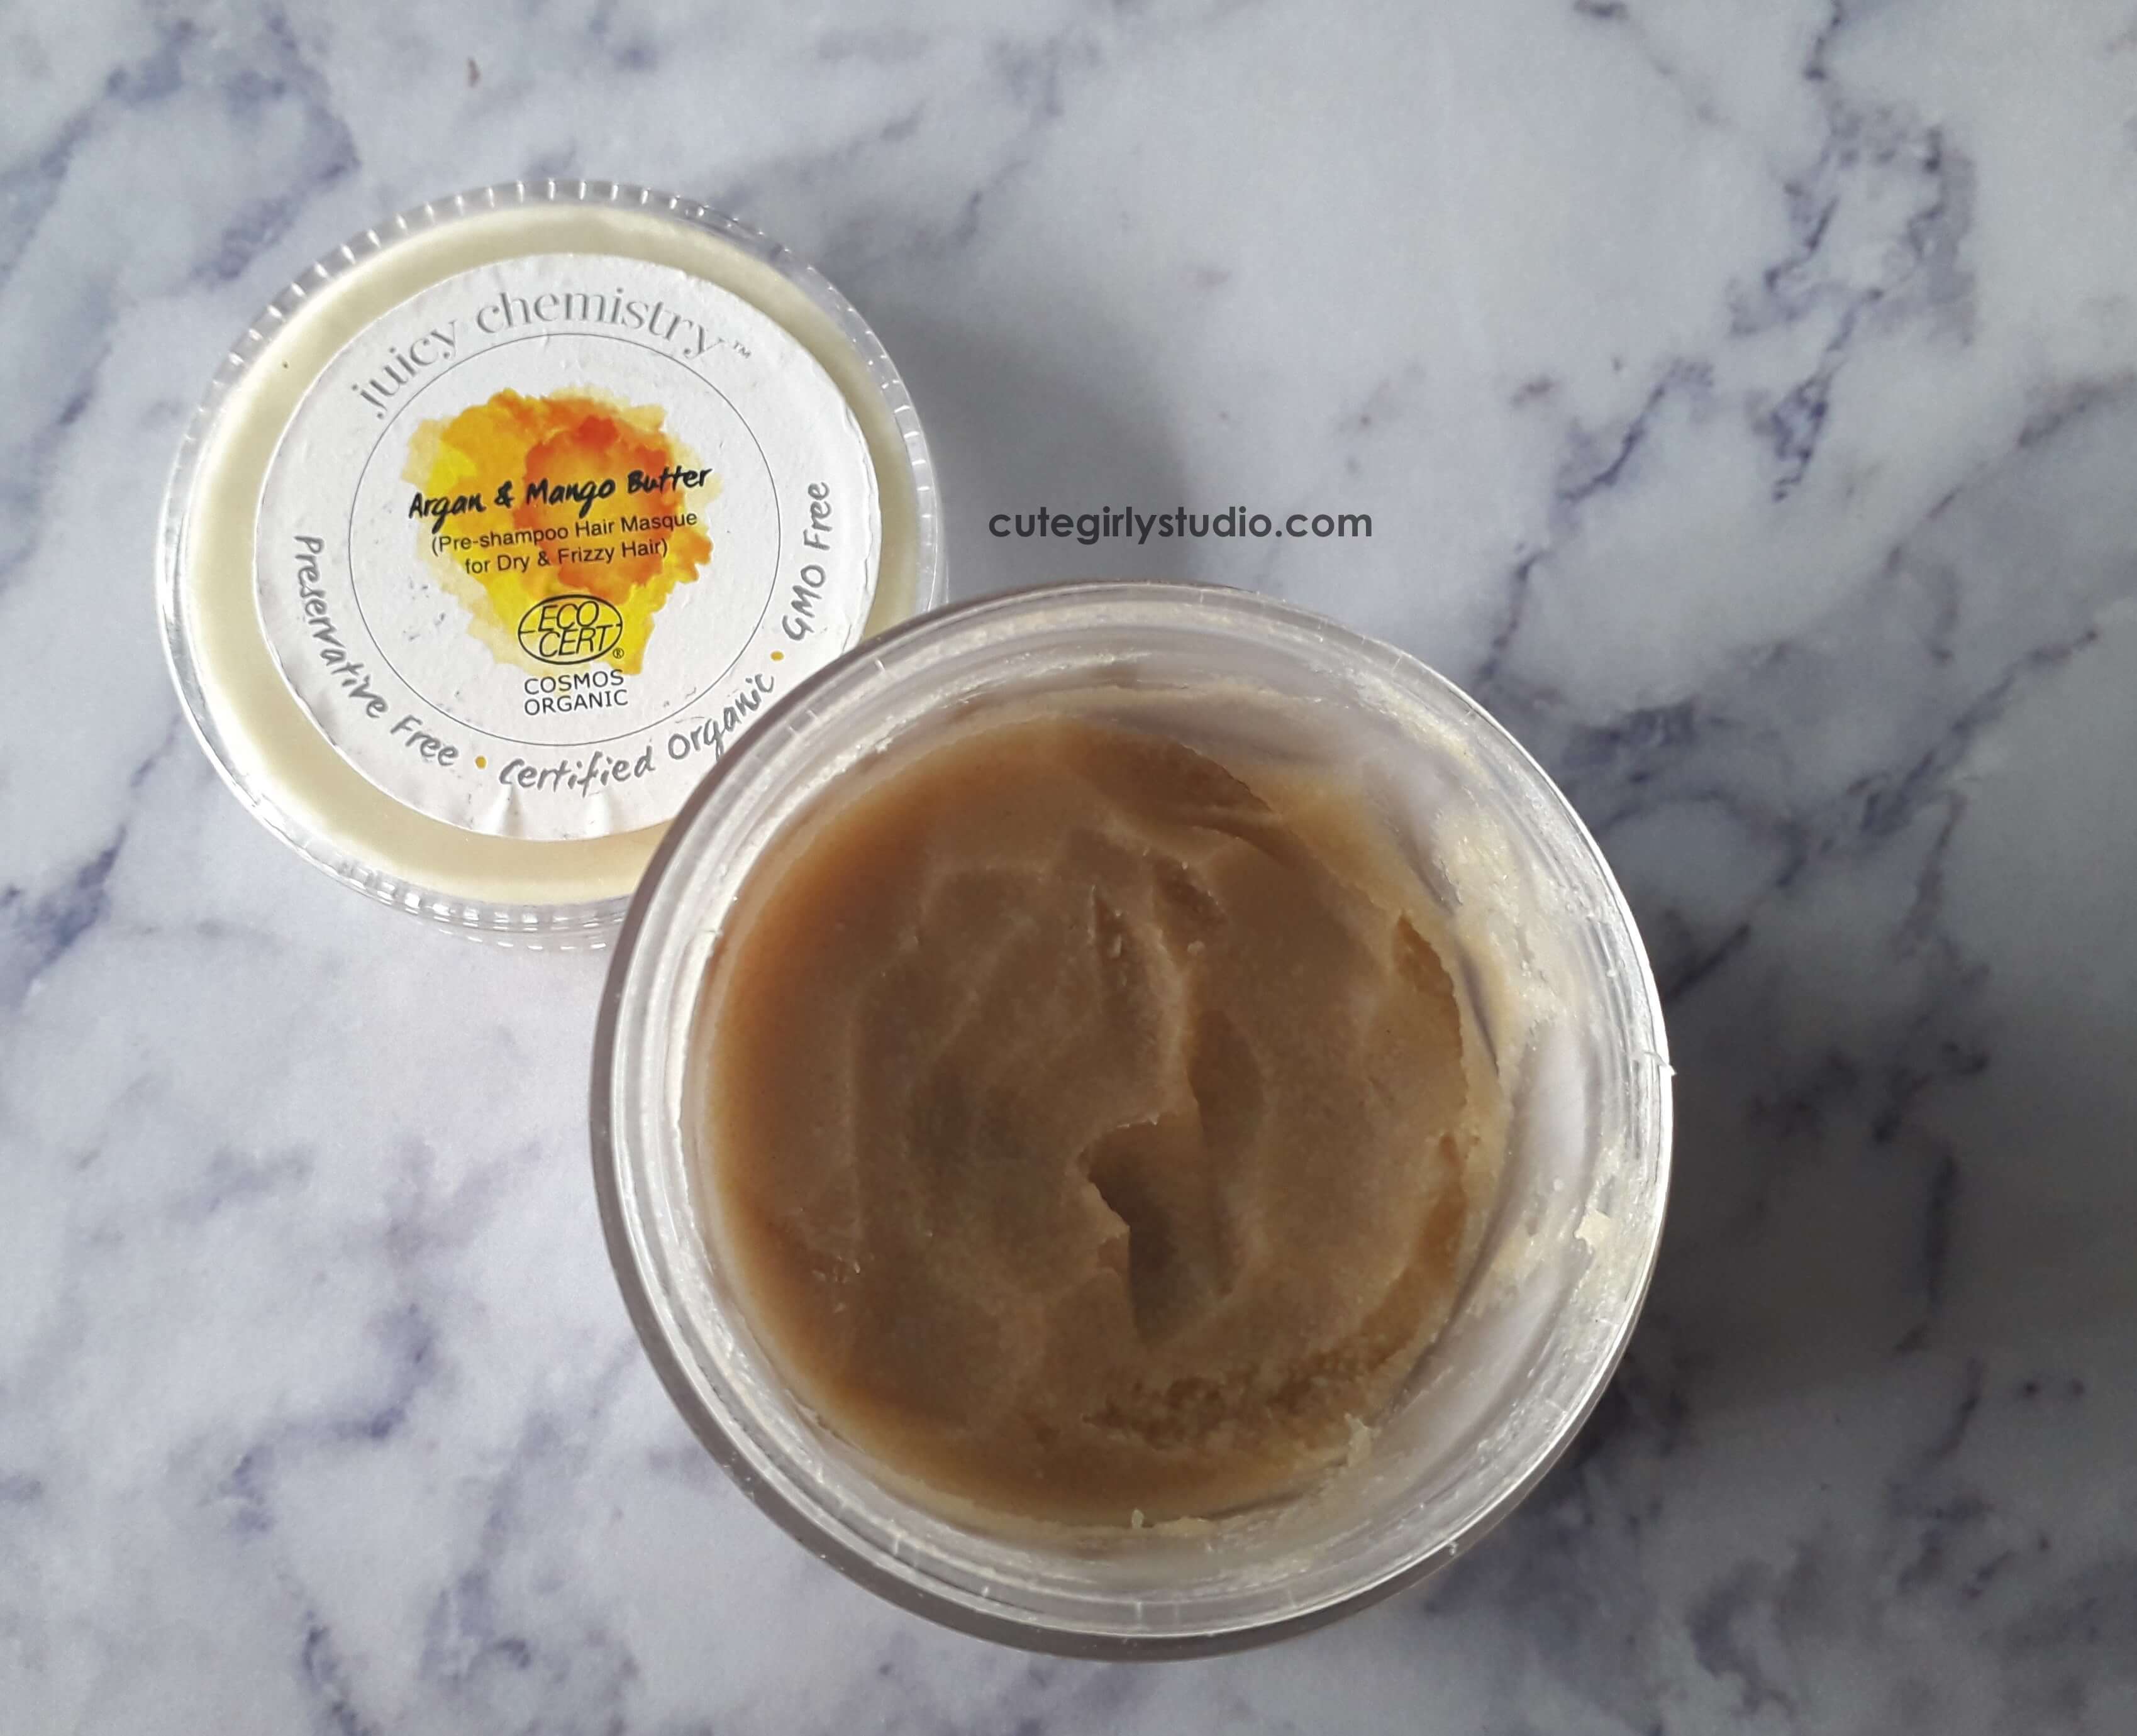 Juicy chemistry argan and mango butter hair masque